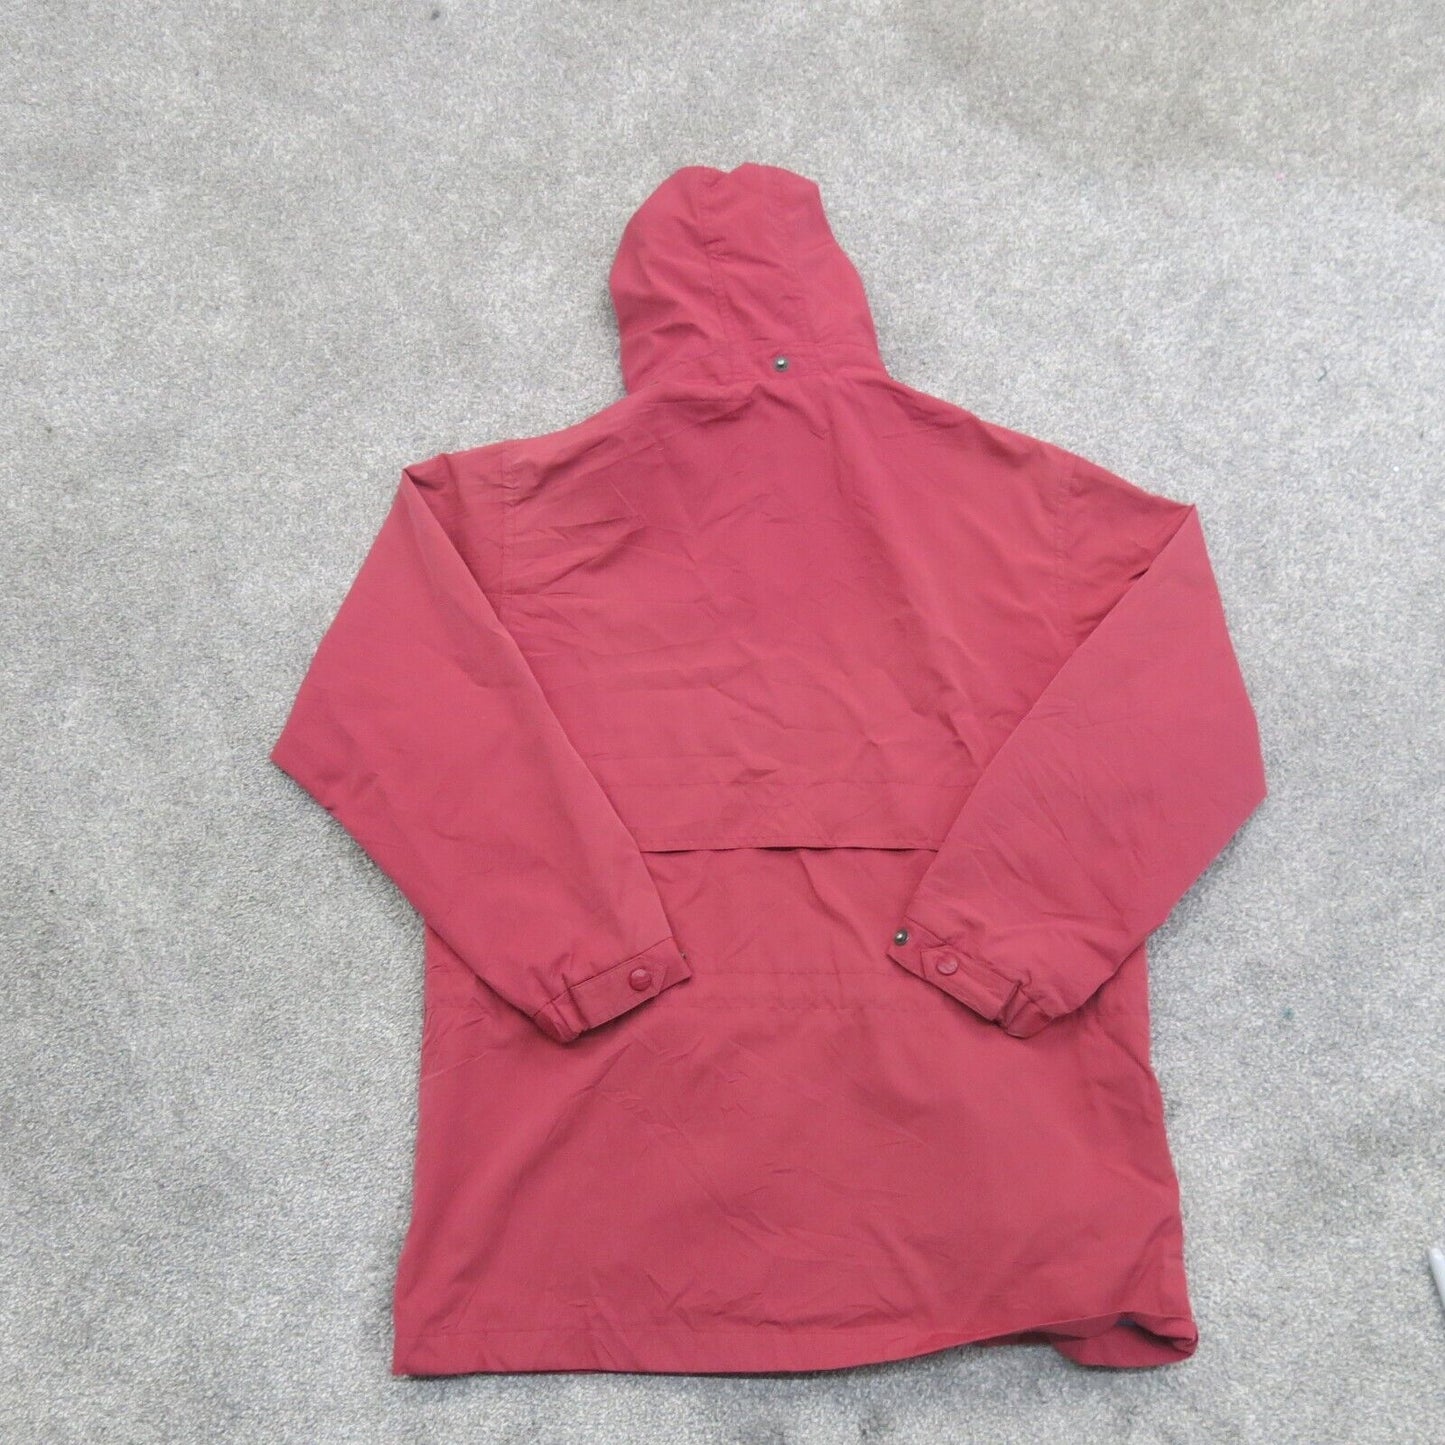 L.L. Bean Womens Hooded Jacket Full Zip Up Long Sleeves Pockets Hot Pink Size S